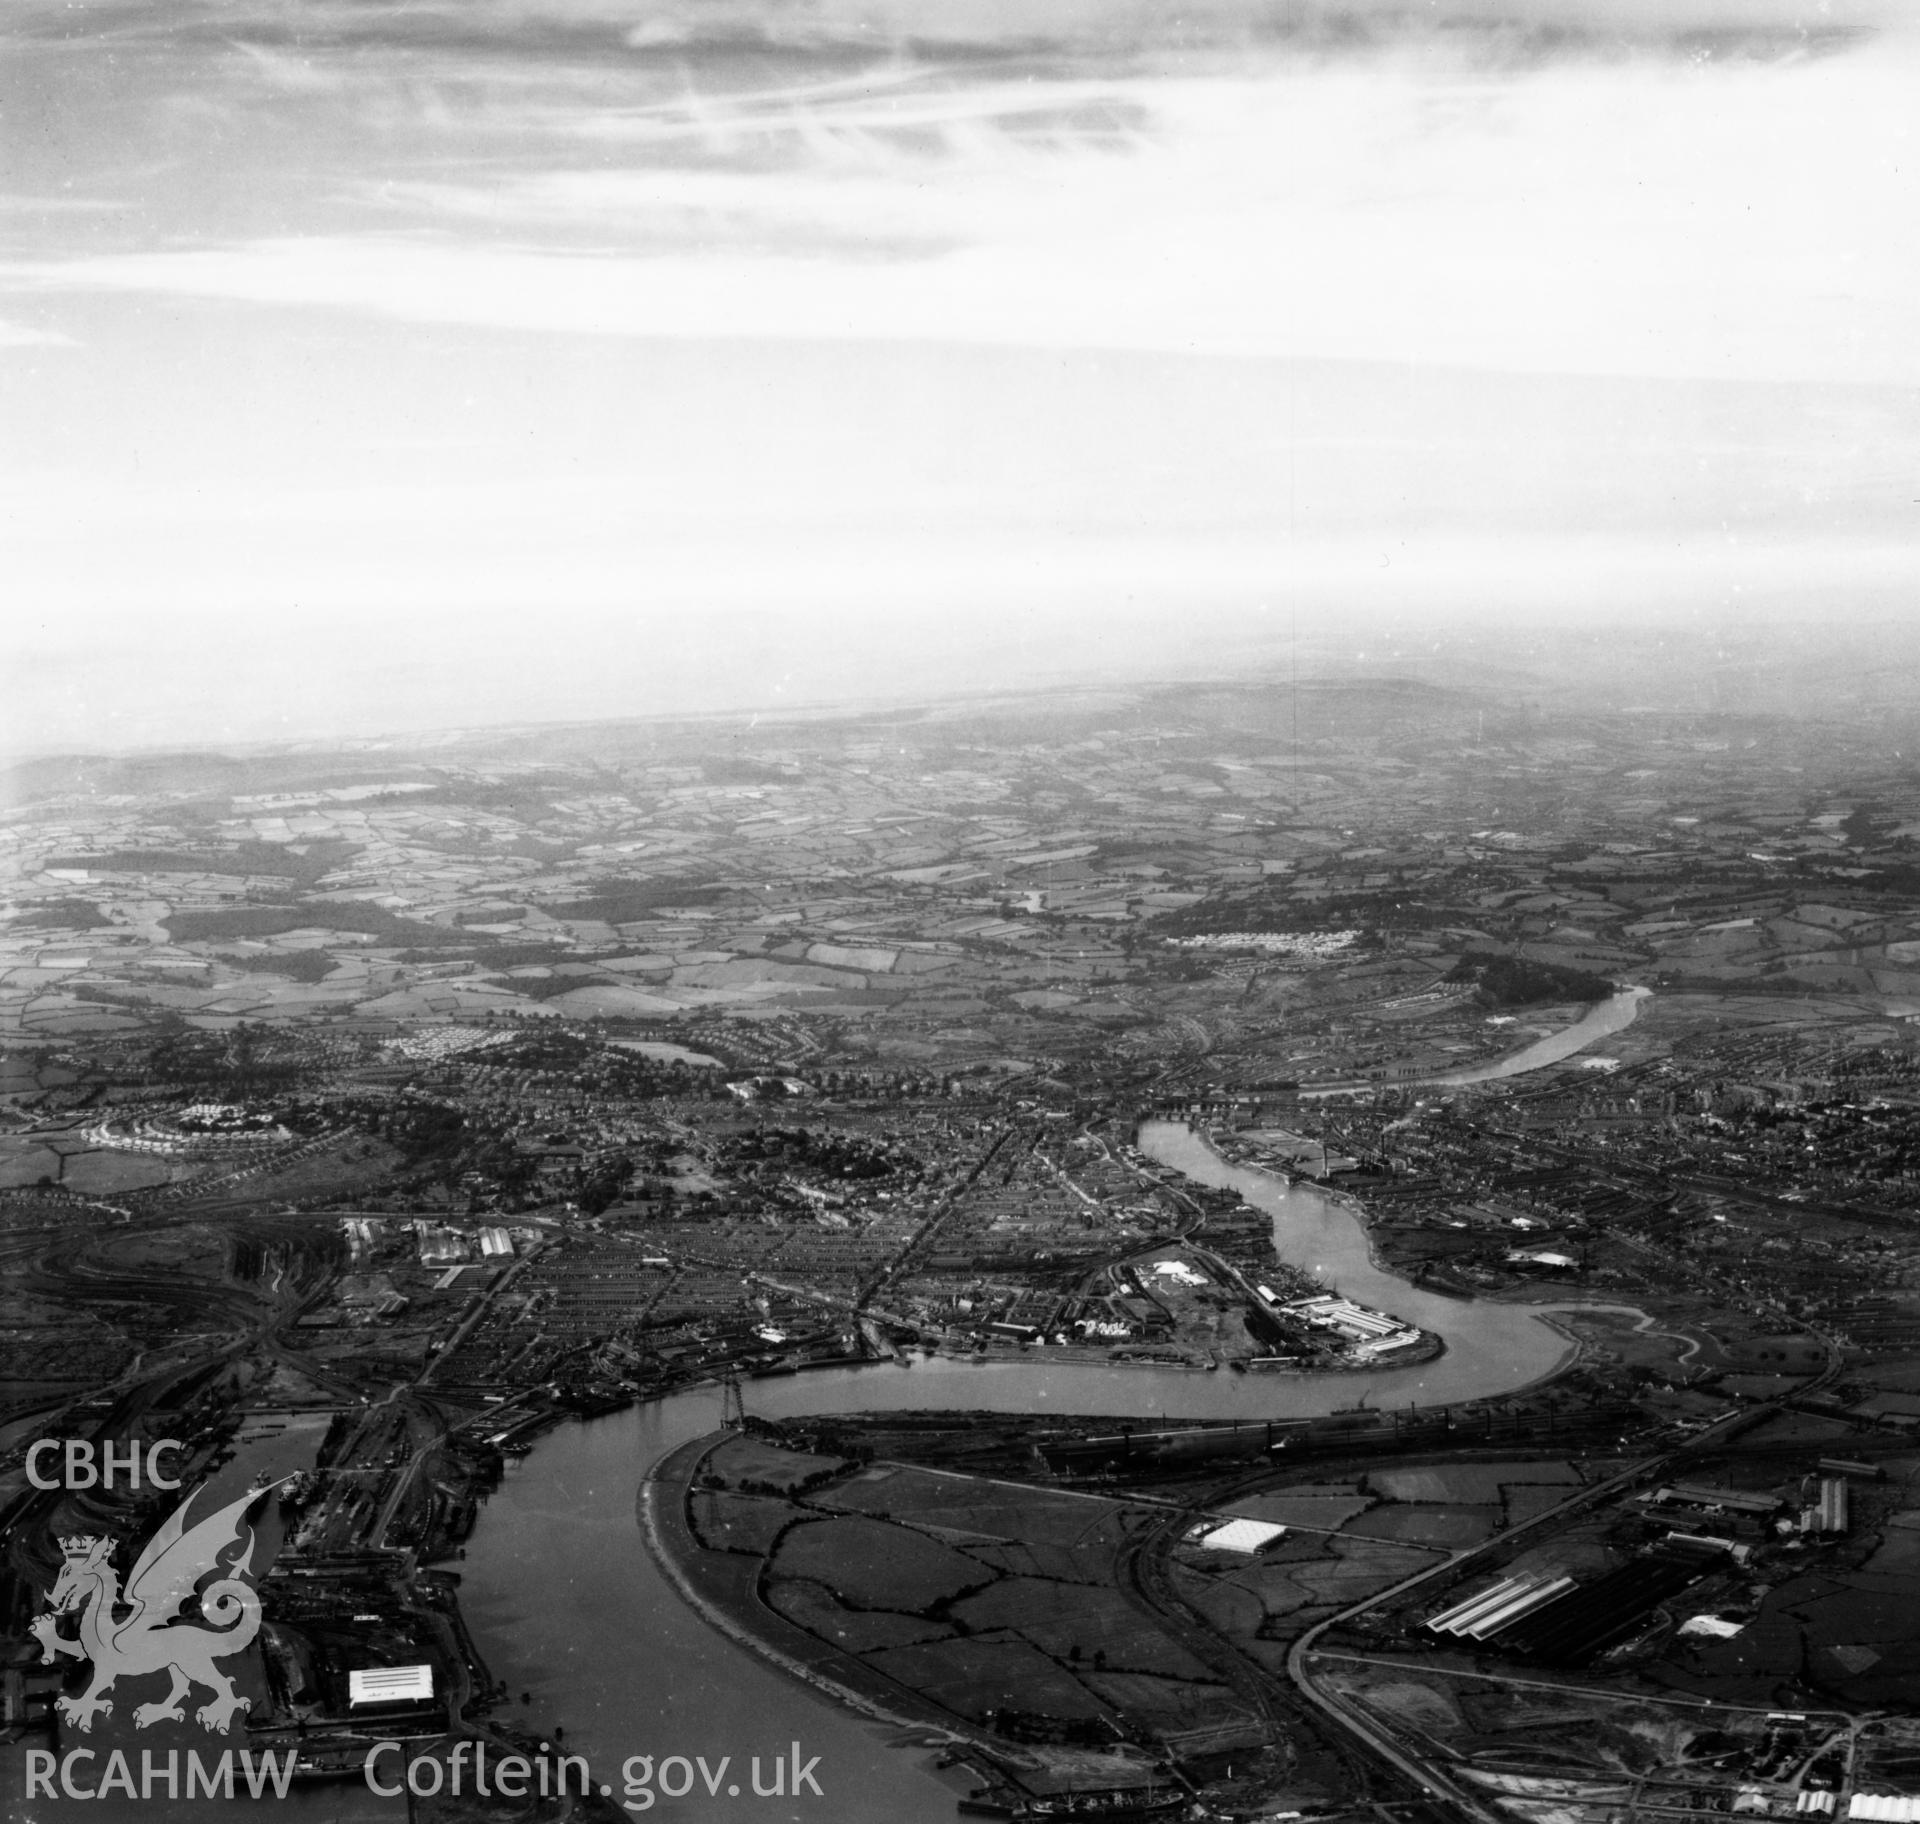 Distant view of Newport from the south. Oblique aerial photograph, 5?" cut roll film.